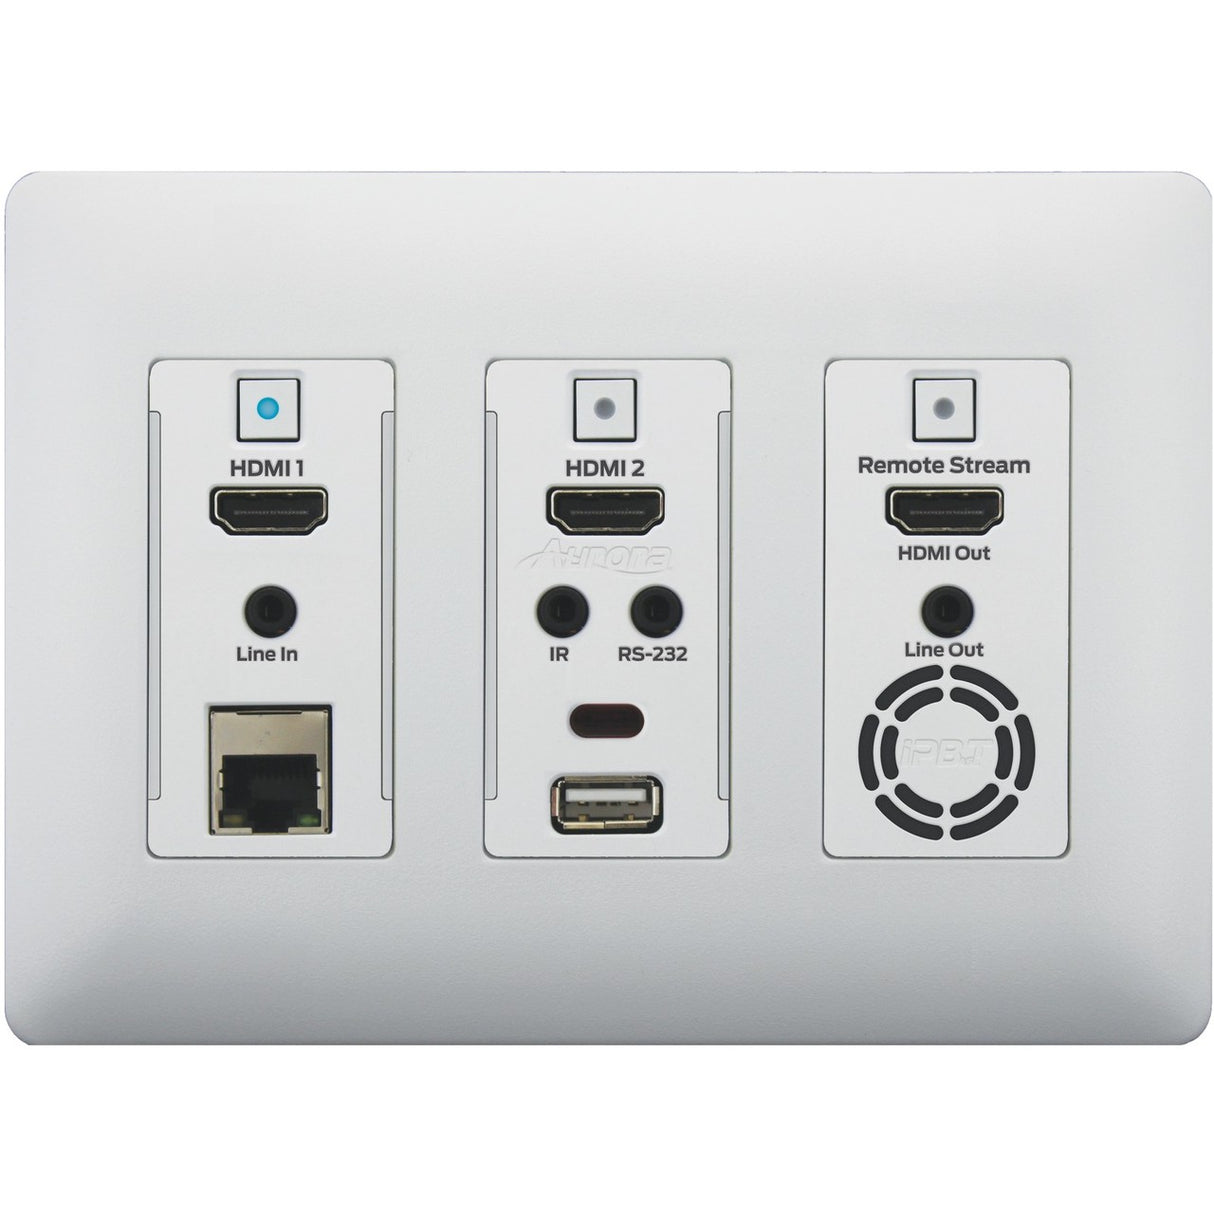 Aurora IPX-TCW3-C-W | 4K over IPBaseT Wall Plate, 10G Copper White